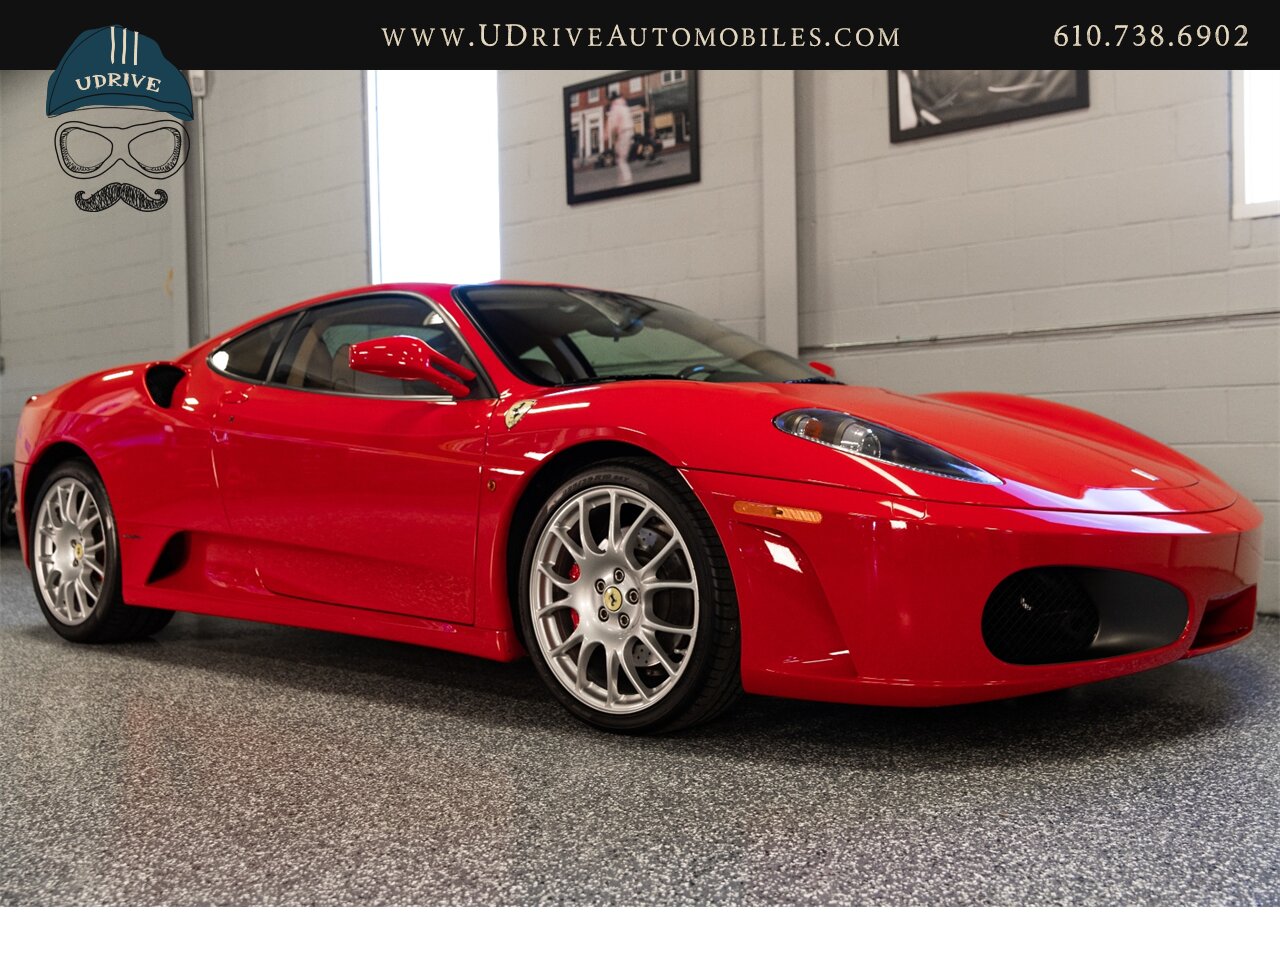 2006 Ferrari F430 F1 Coupe 1 Owner Daytona Seats Challenge Whls  Carbon Fibre Upper Lower Zone Shields Piping Serv Hist $208k MSRP - Photo 12 - West Chester, PA 19382